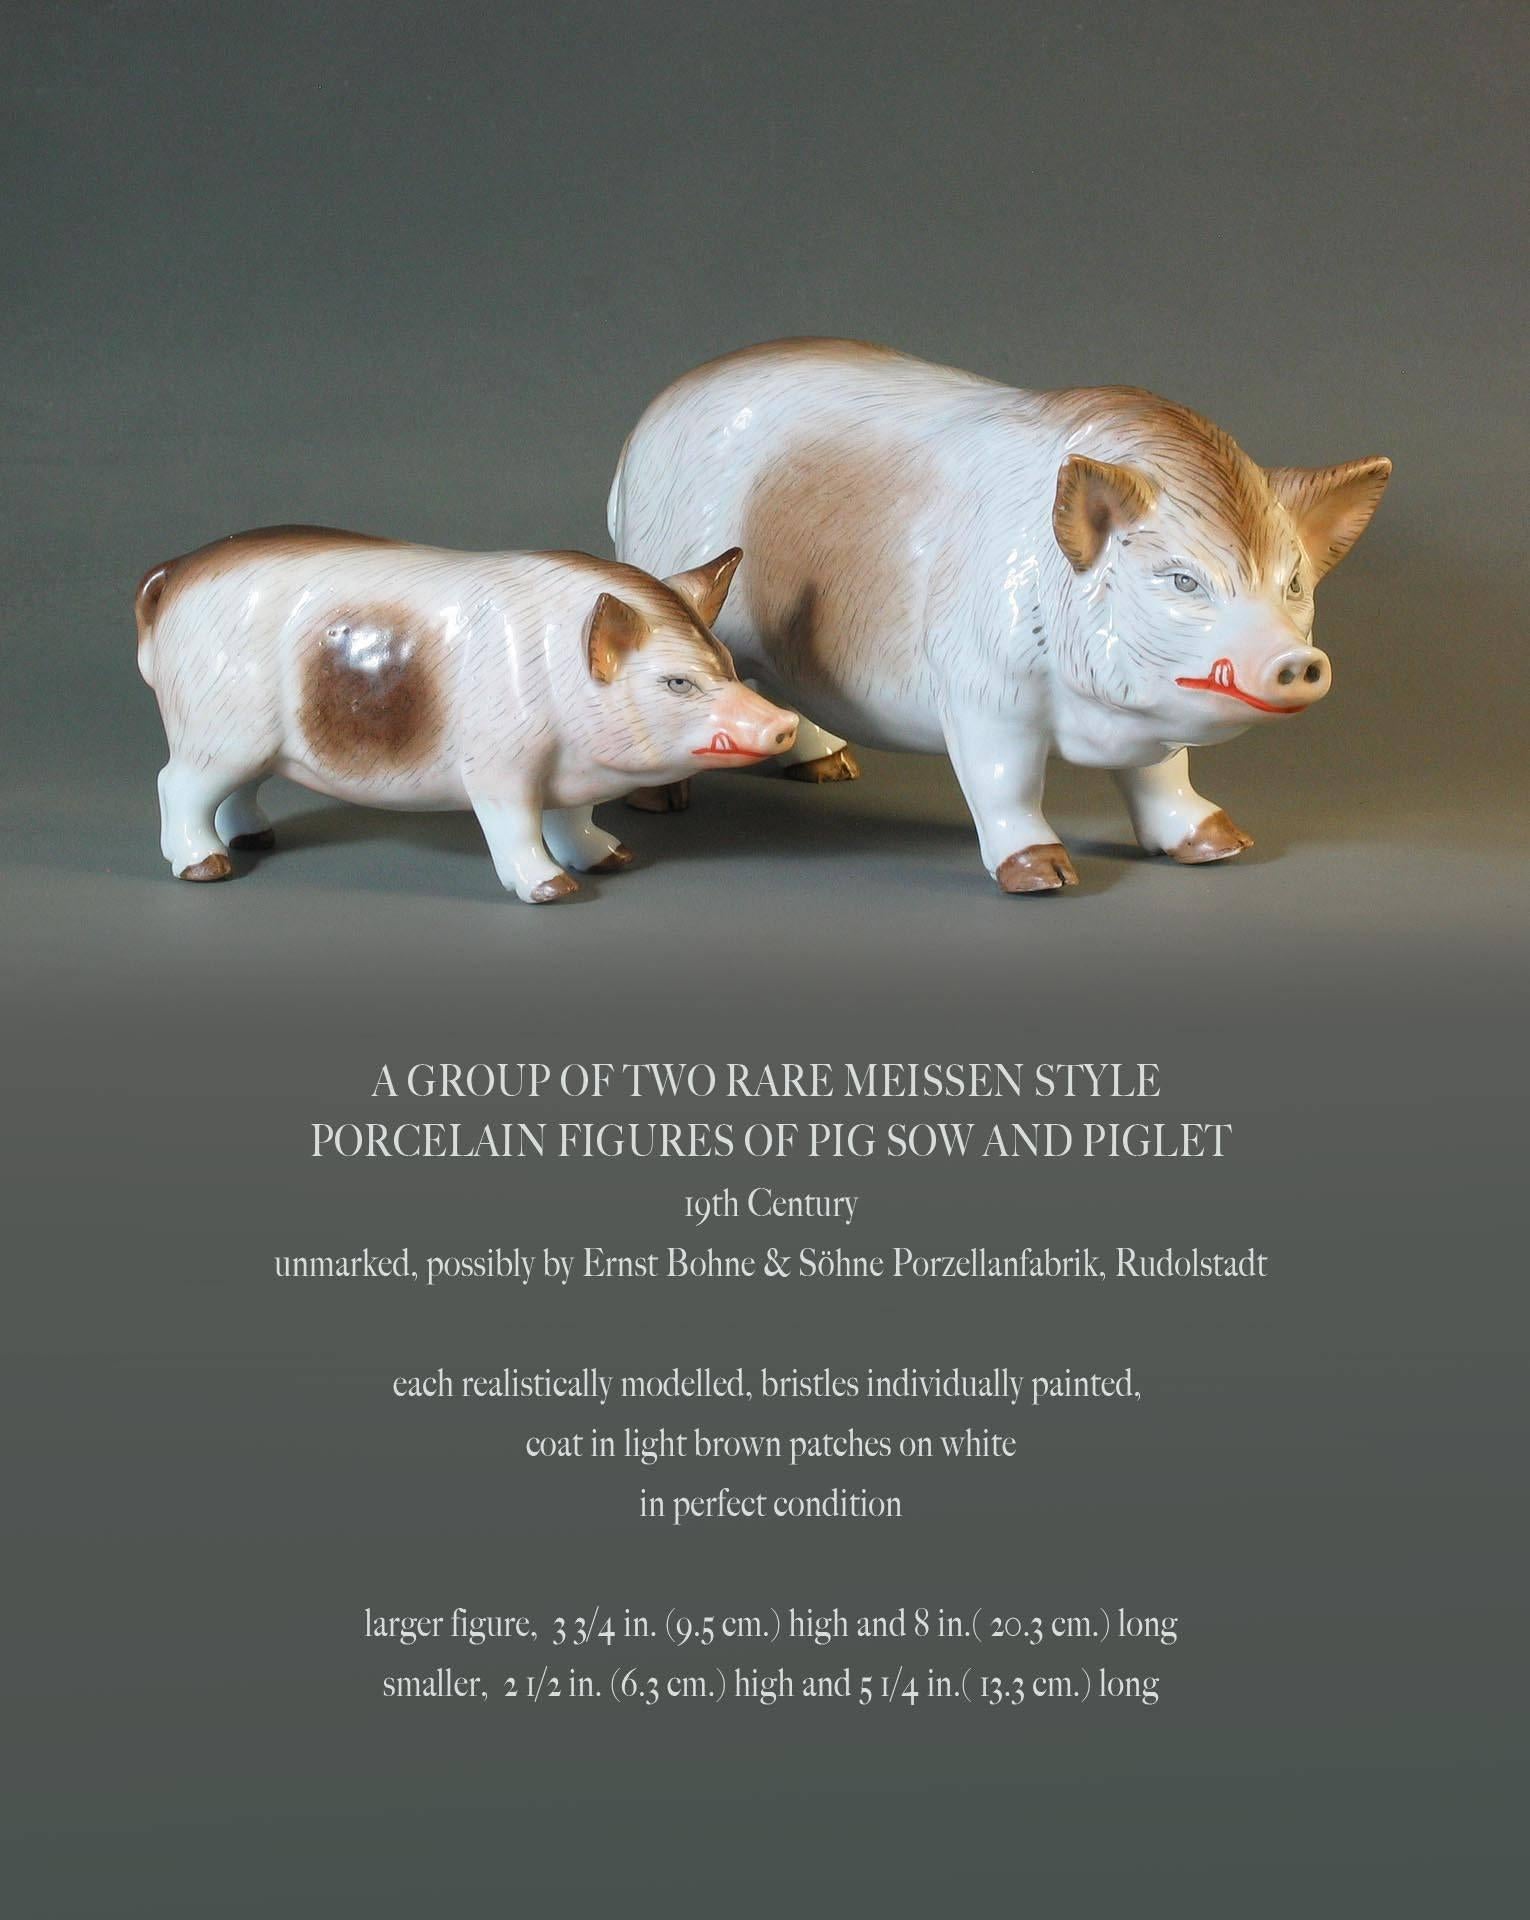 A group of two rare Meissen style porcelain figures of pig sow and piglet, 19th century.
Unmarked, Possibly by Ernest Bohne & Sohne Porzellanfabrik, Rudolstadt. Each realistically modelled, bristles individually painted, coat in light brown patches